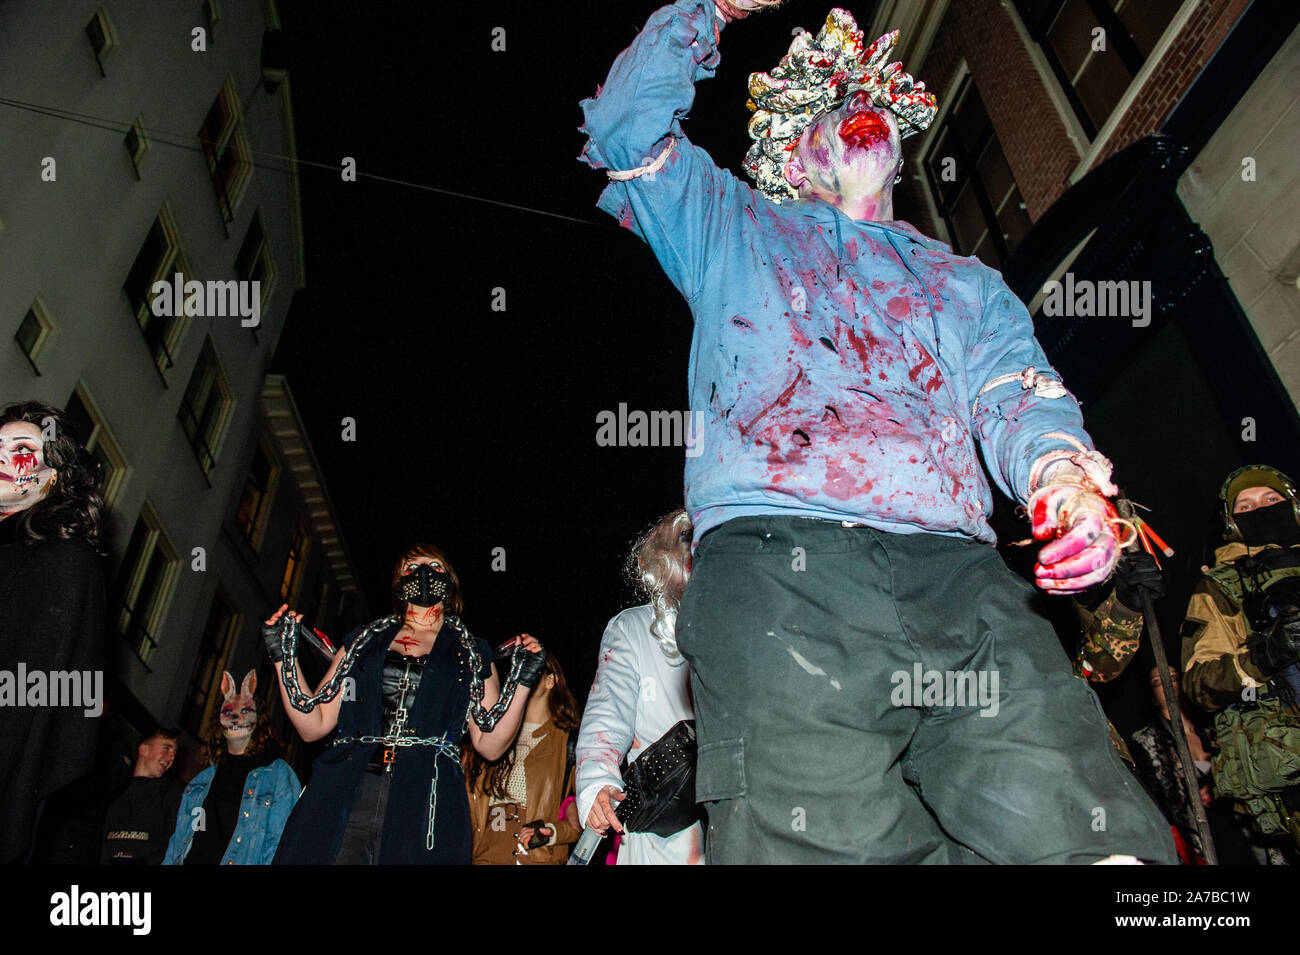 Arnhem, Netherlands. 31st Oct, 2019. Several zombies are seen walking on the streets.As in previous years, the Zombie Walk took place around the center of Arnhem. The walk started at the live music venue Willemeen, where makeup artists were creating their zombie makeups. Hundreds of zombies staggered through the inner city in search of fresh brains during the ultimate Halloween Parade. Credit: SOPA Images Limited/Alamy Live News Stock Photo